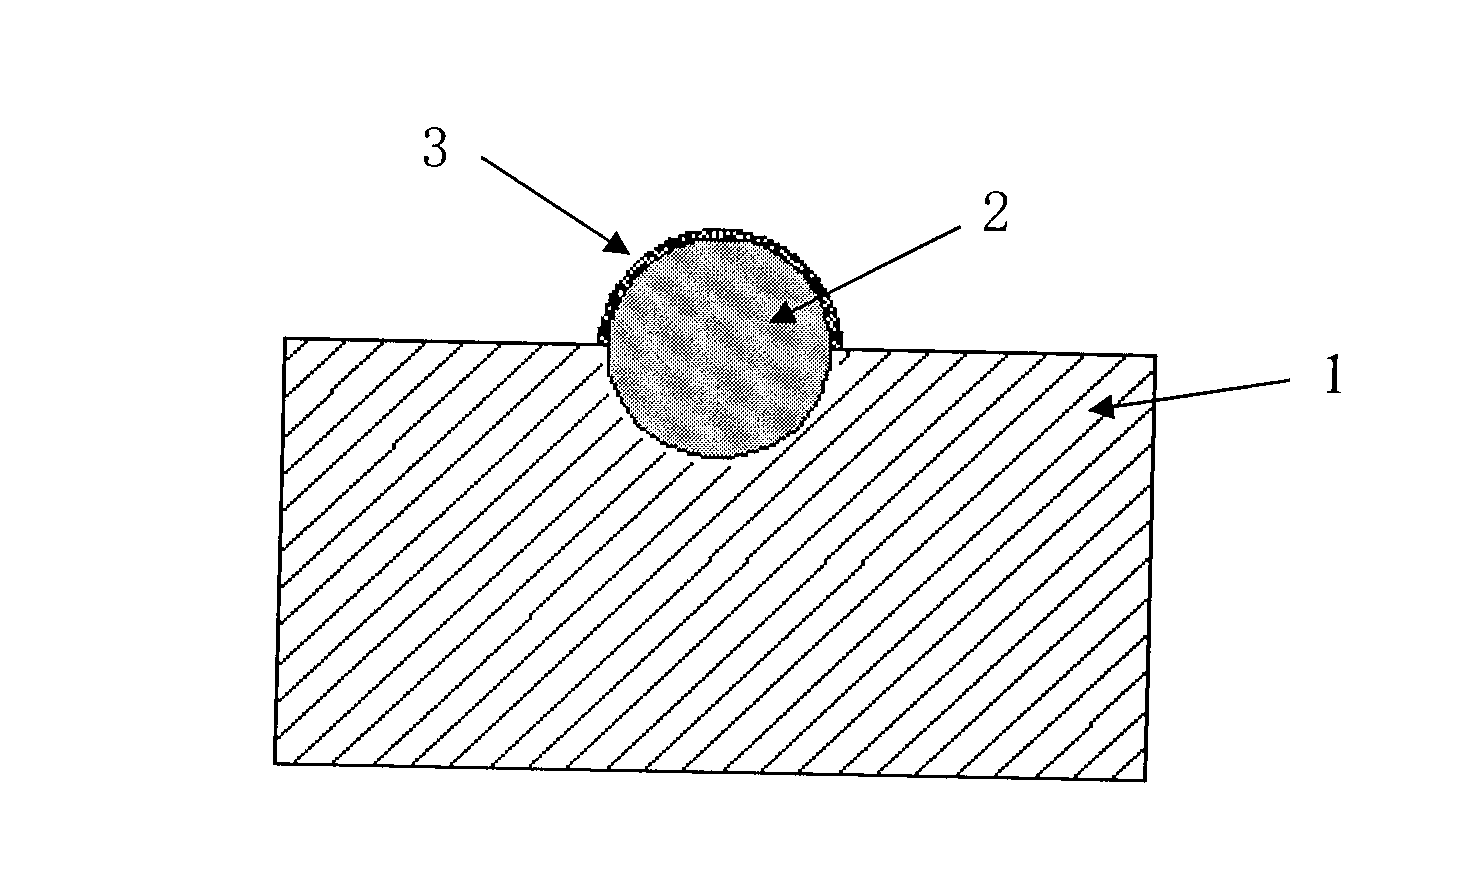 Concentric sphere and its manufacturing method